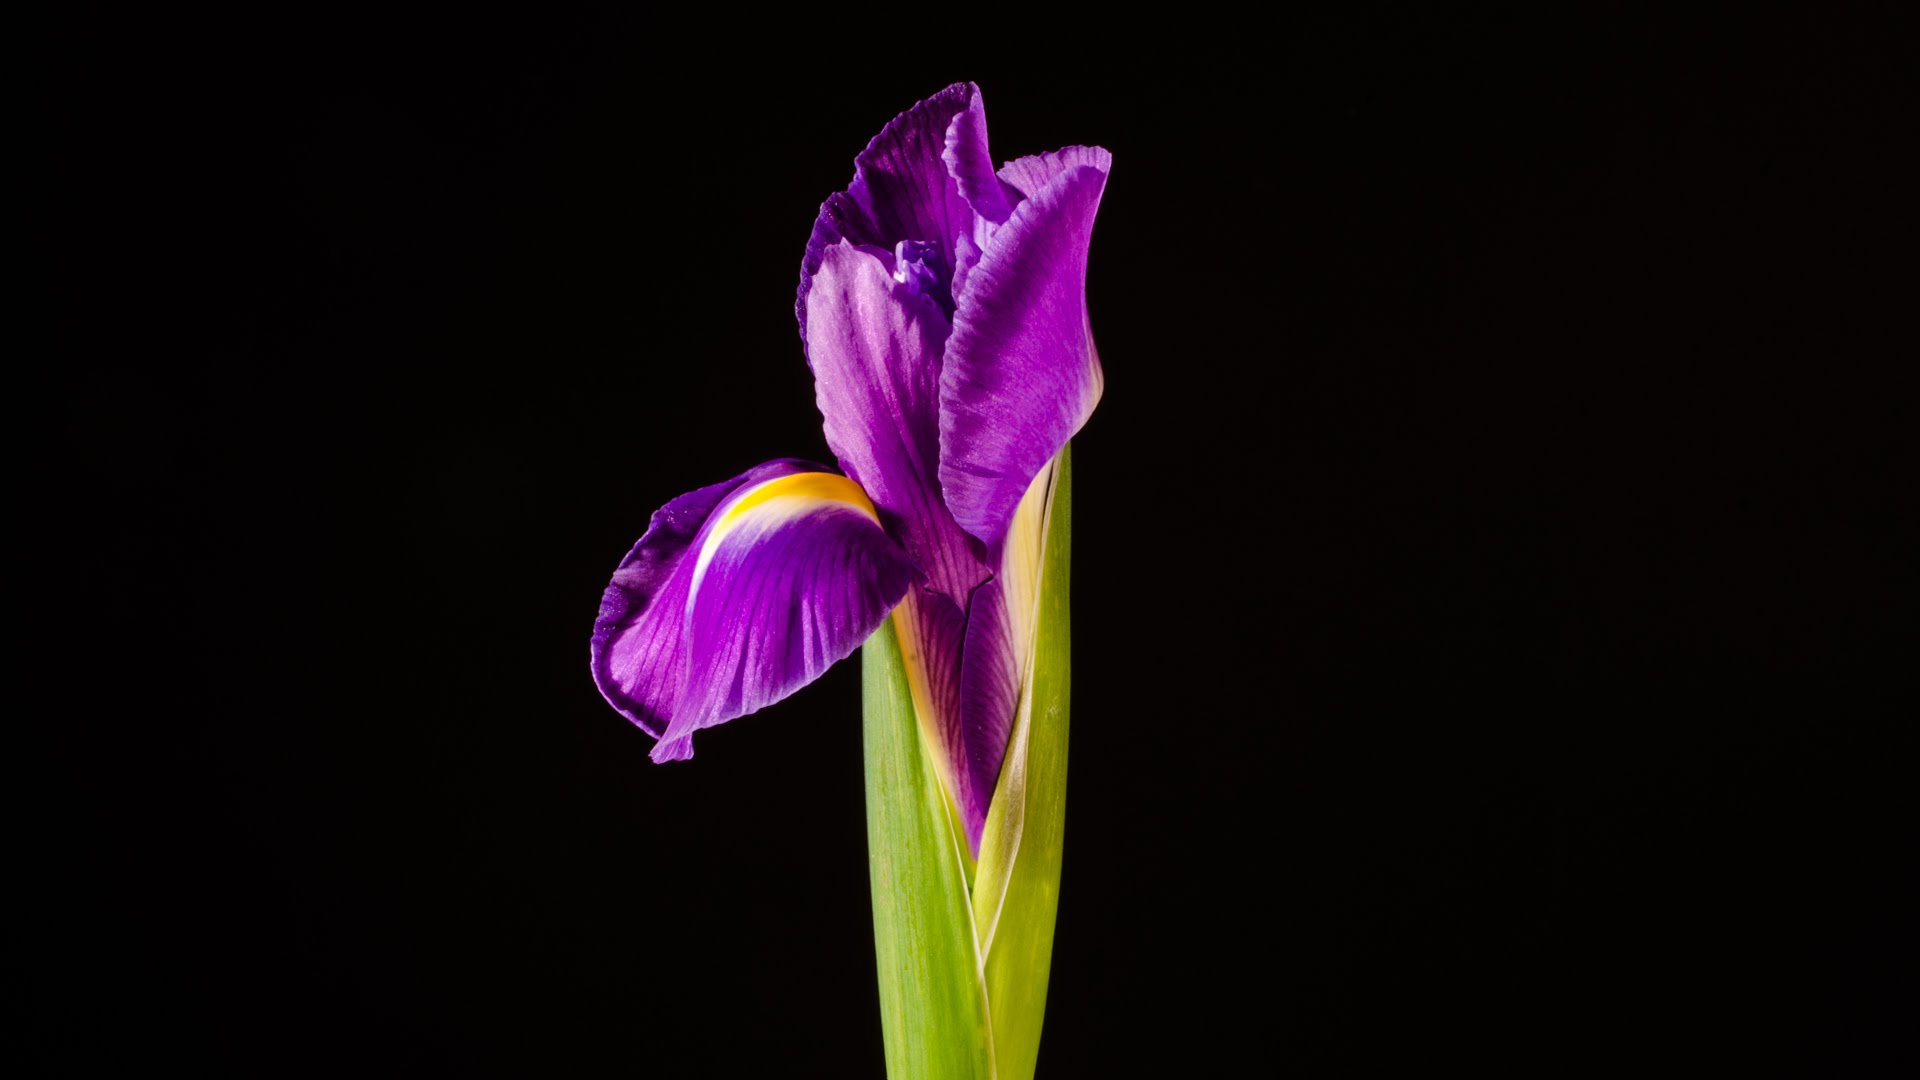 Iris - blooming flower time-lapse video HD - YouTube